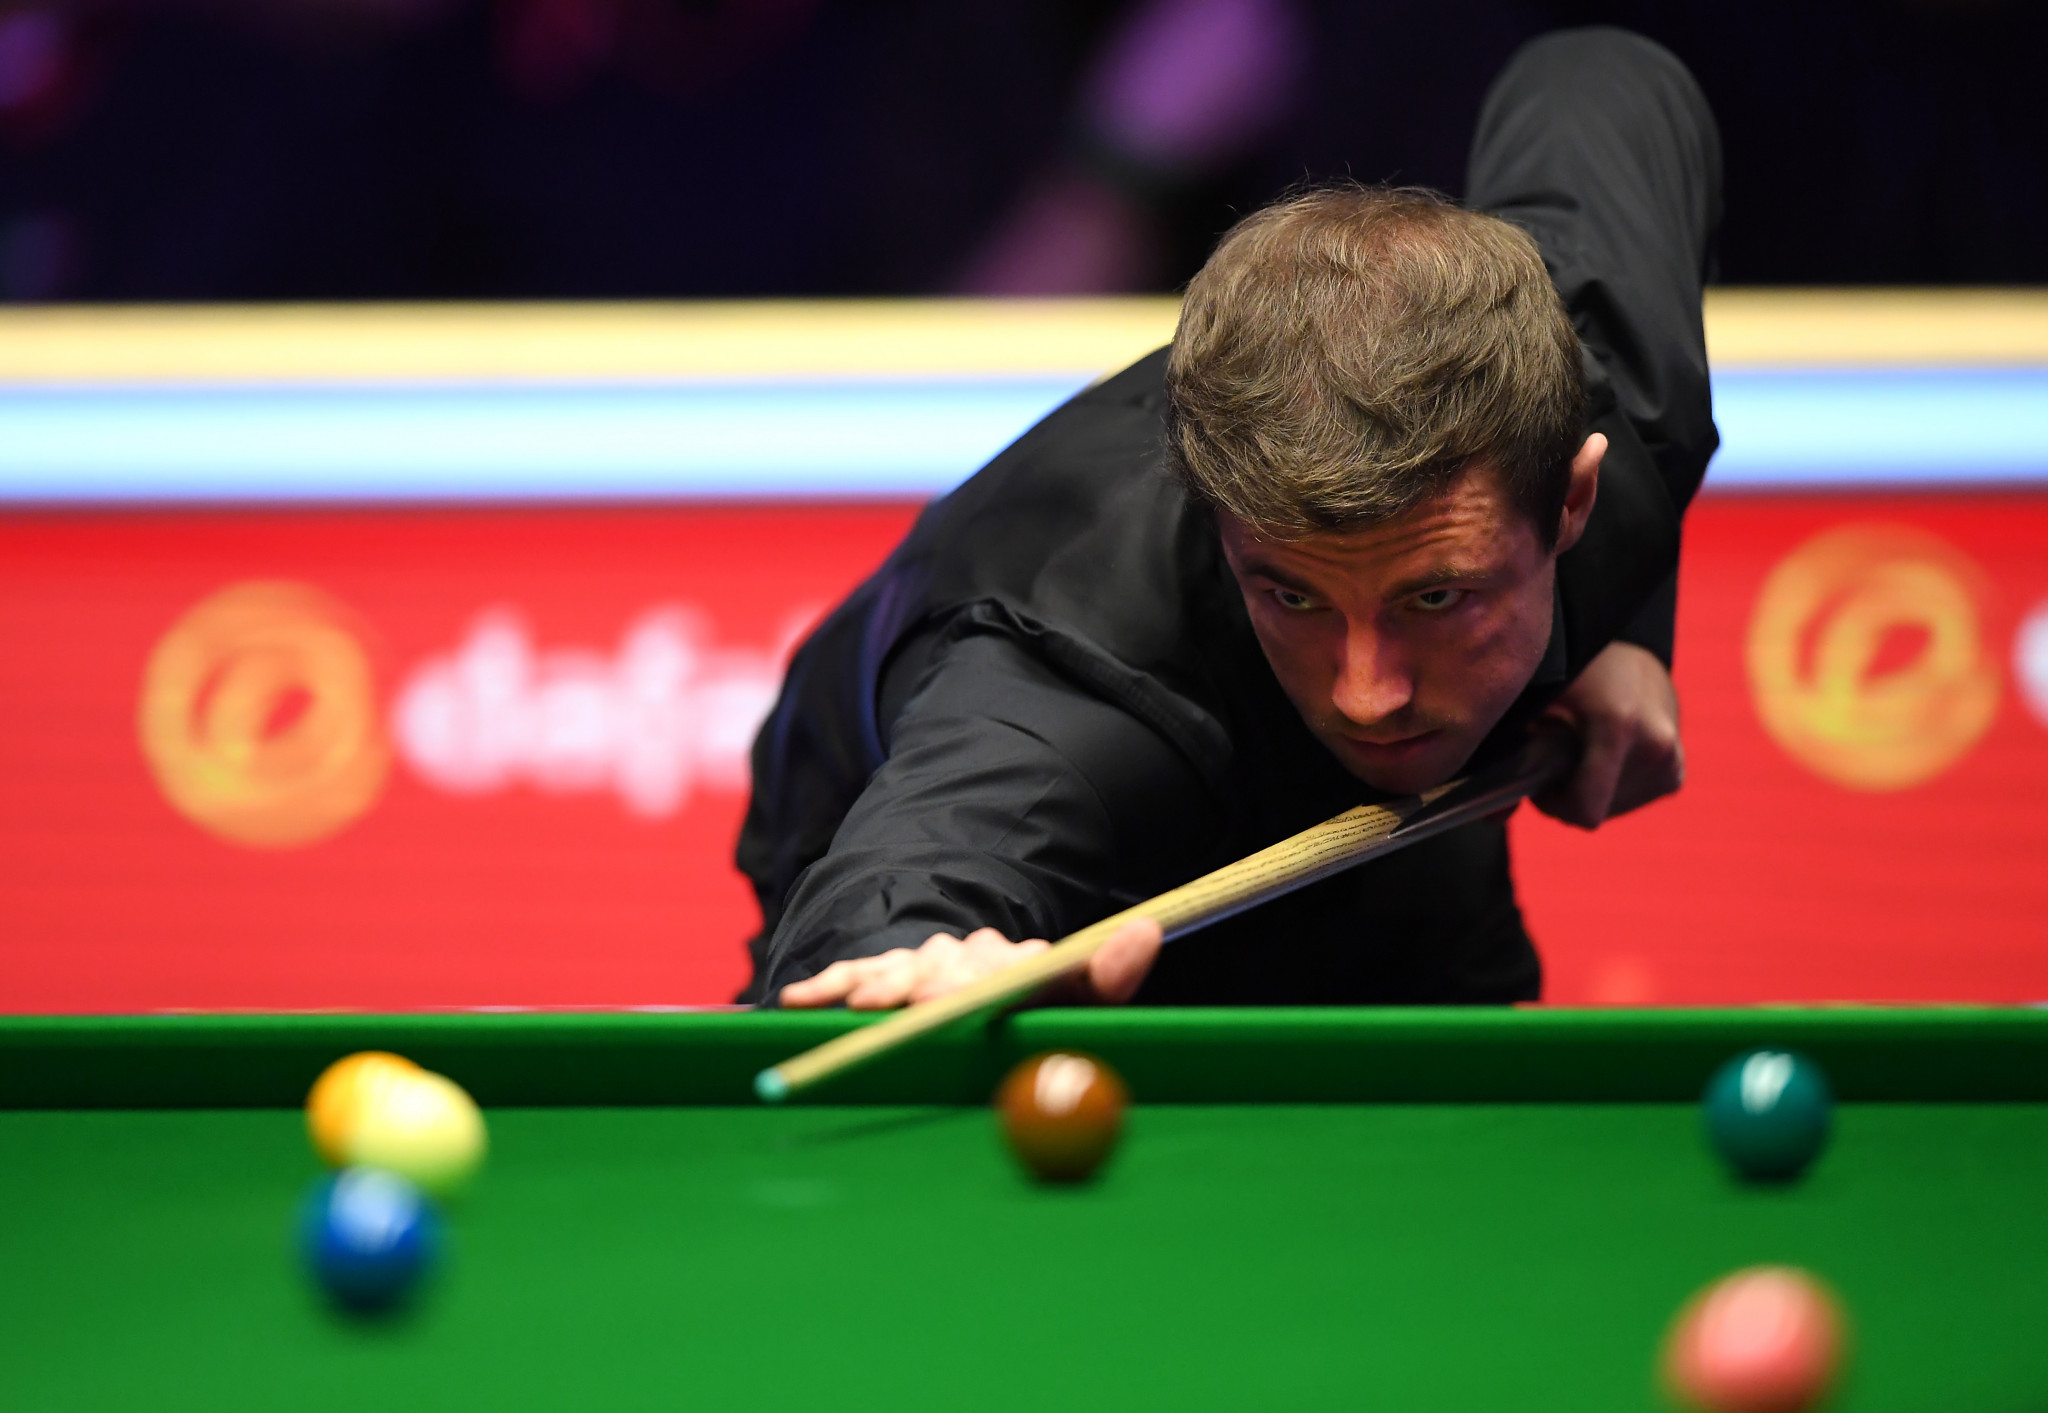 England's Jack Lisowski, the 13th seed, crashed out after losing a dramatic deciding frame to Scotland's Anthony McGill today ©Getty Images